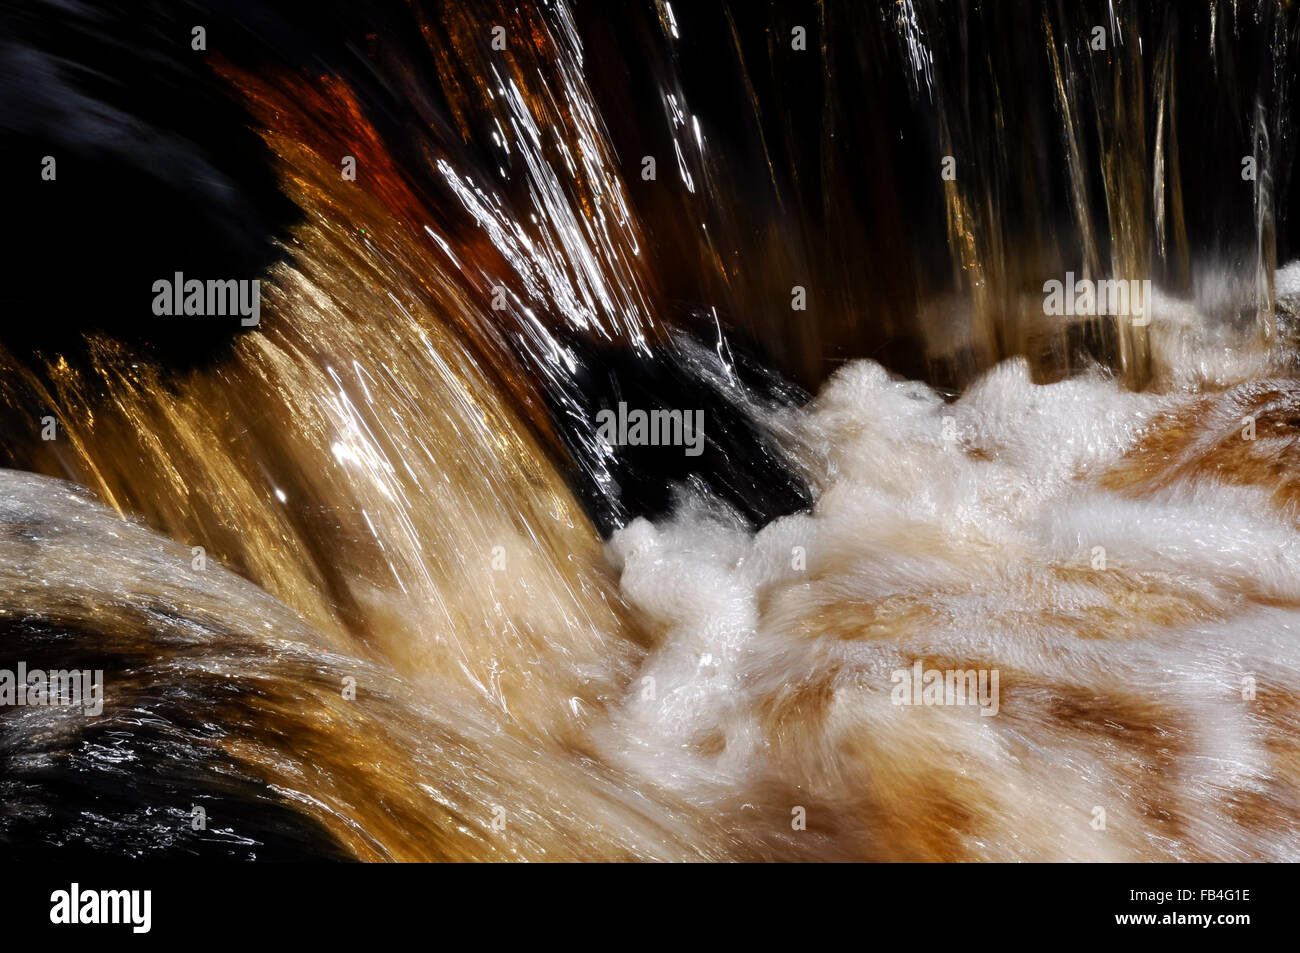 Abstract image of peaty coloured water flowing in a moorland stream. Stock Photo